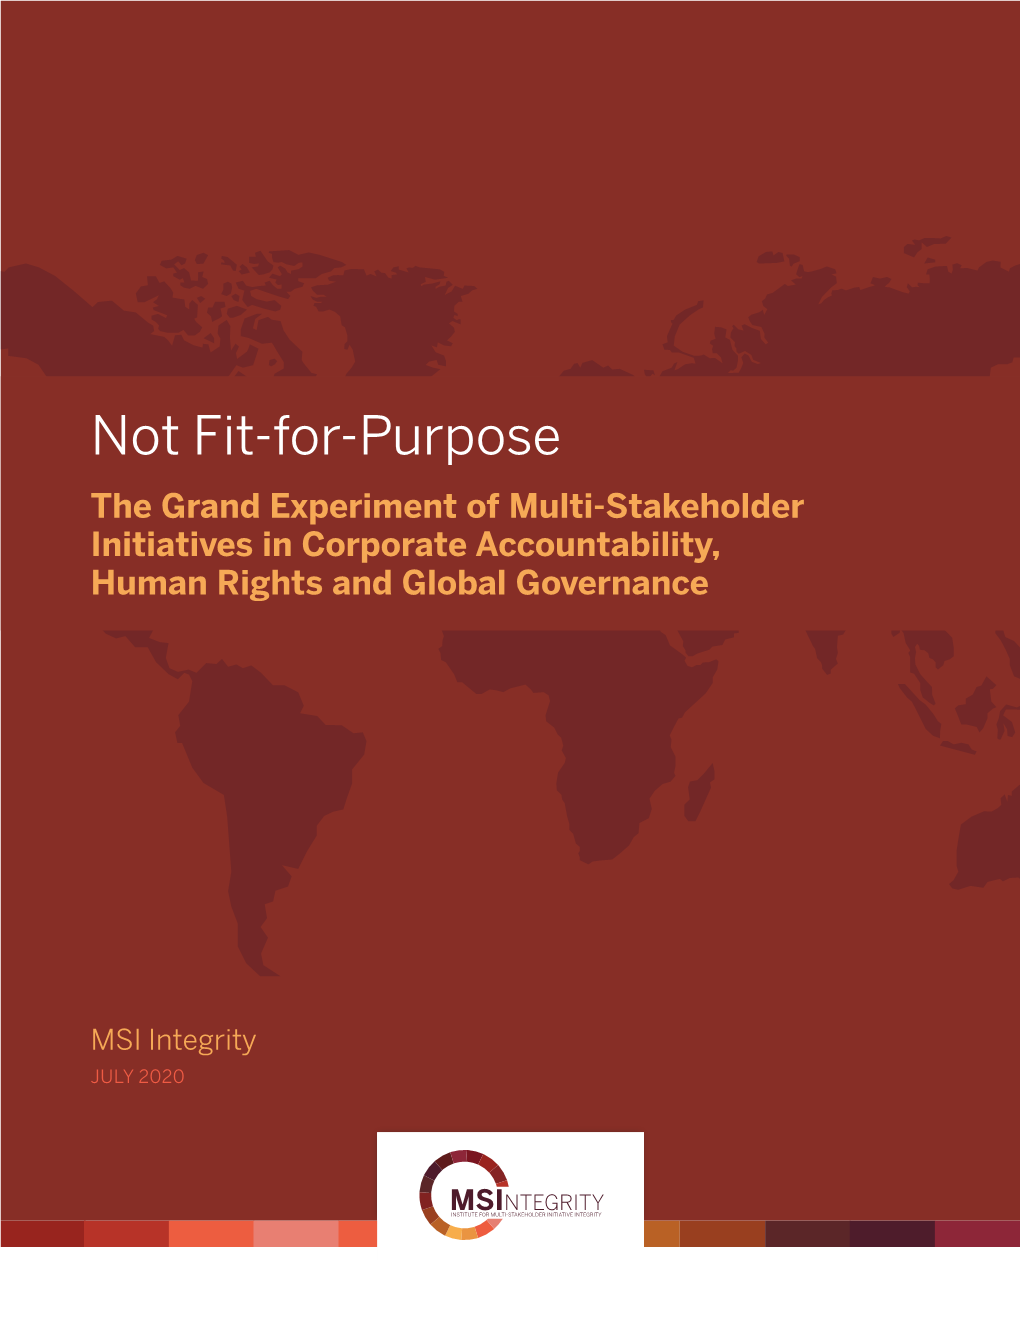 Not Fit-For-Purpose: the Grand Experiment of Multi-Stakeholder Initiatives in Corporate Accountability, Human Rights and Global Governance, July 2020